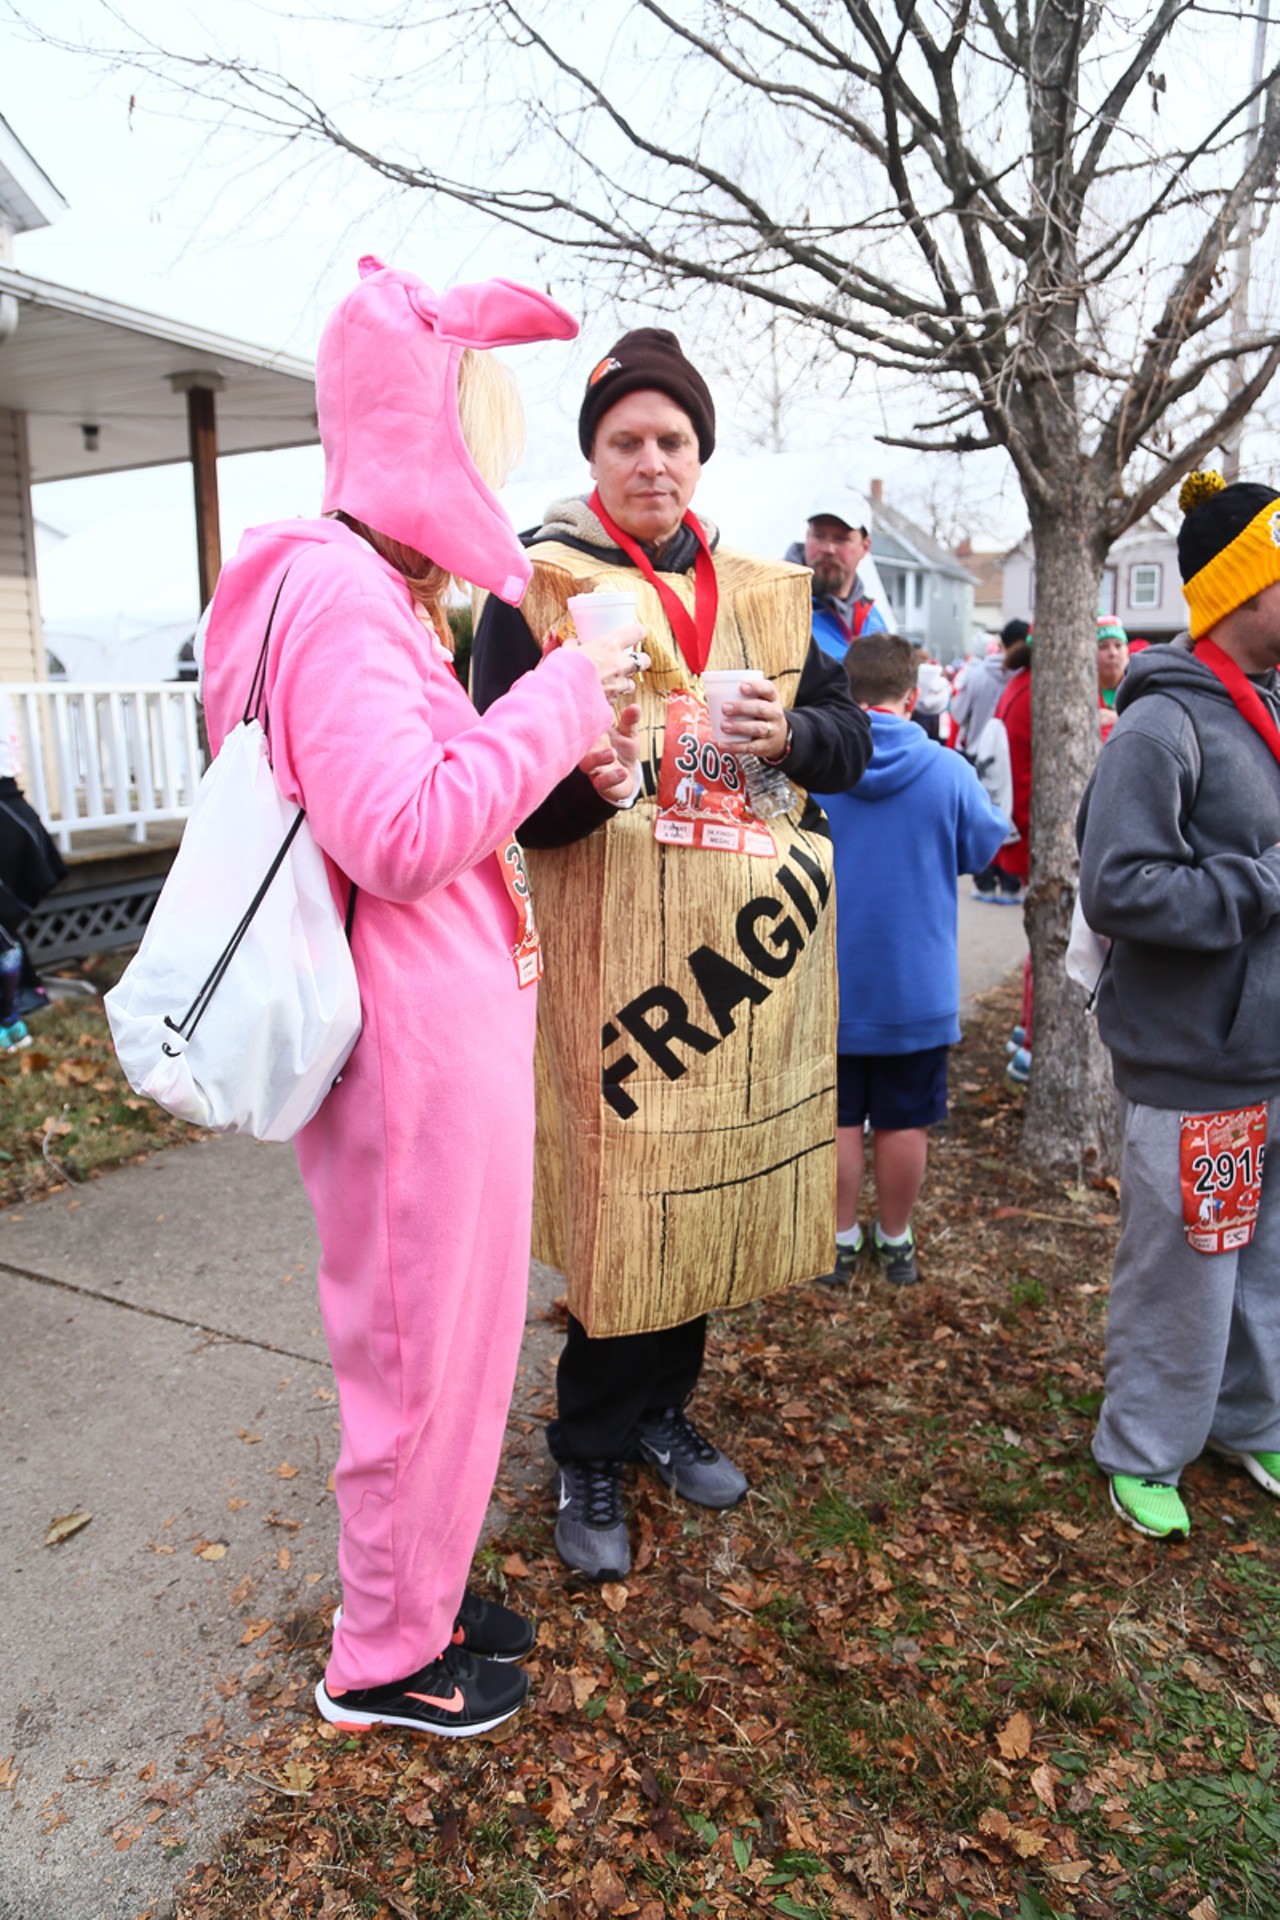 All the Photos From A Christmas Story Run 2017